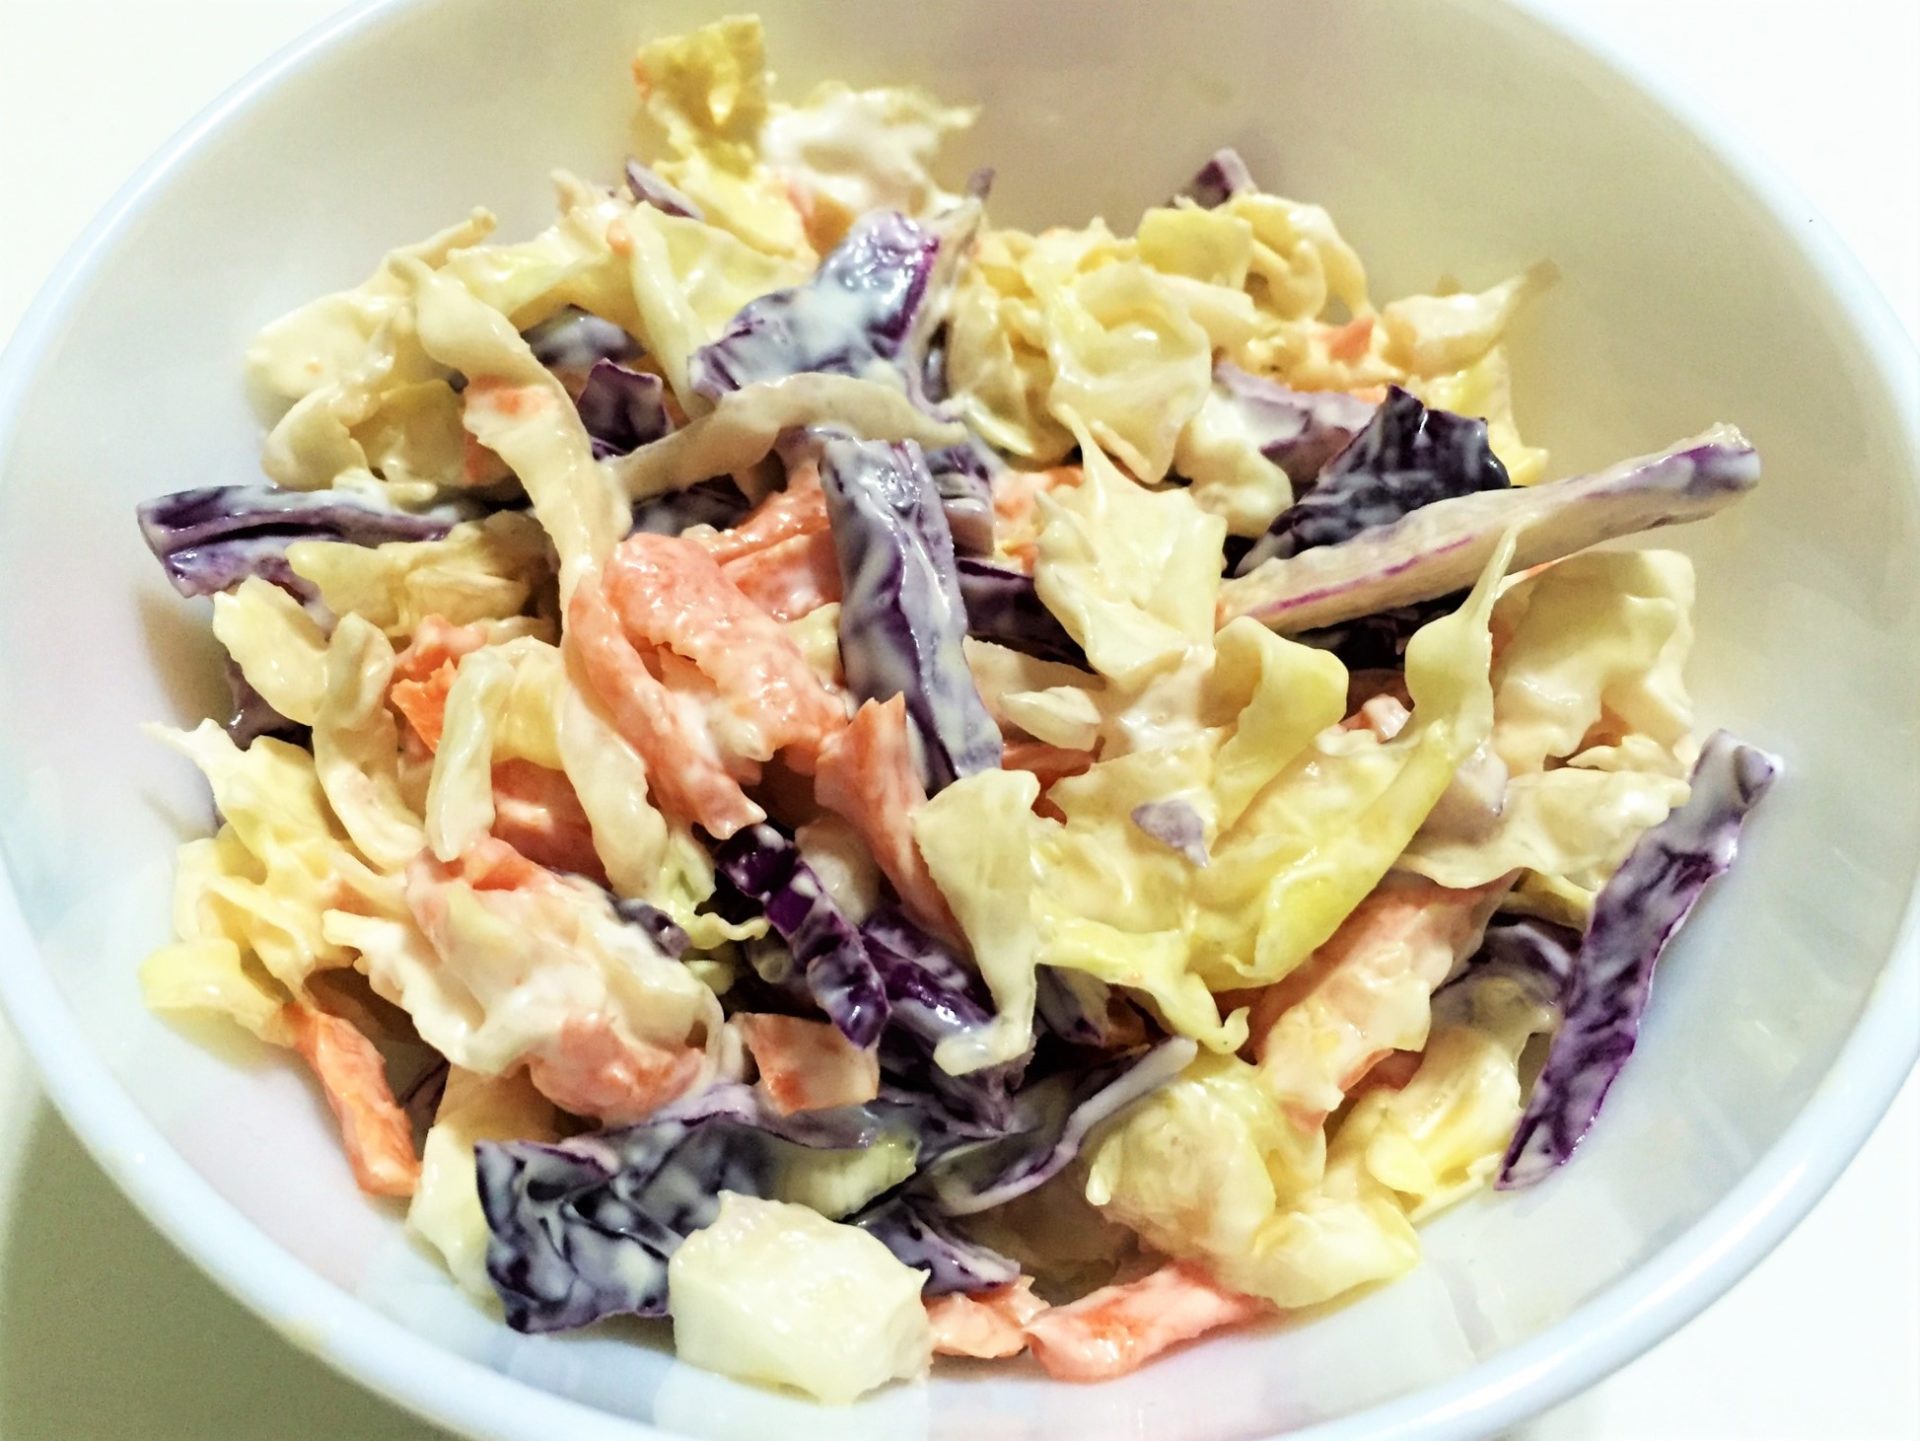 Coleslaw with Sour Cream Dressing